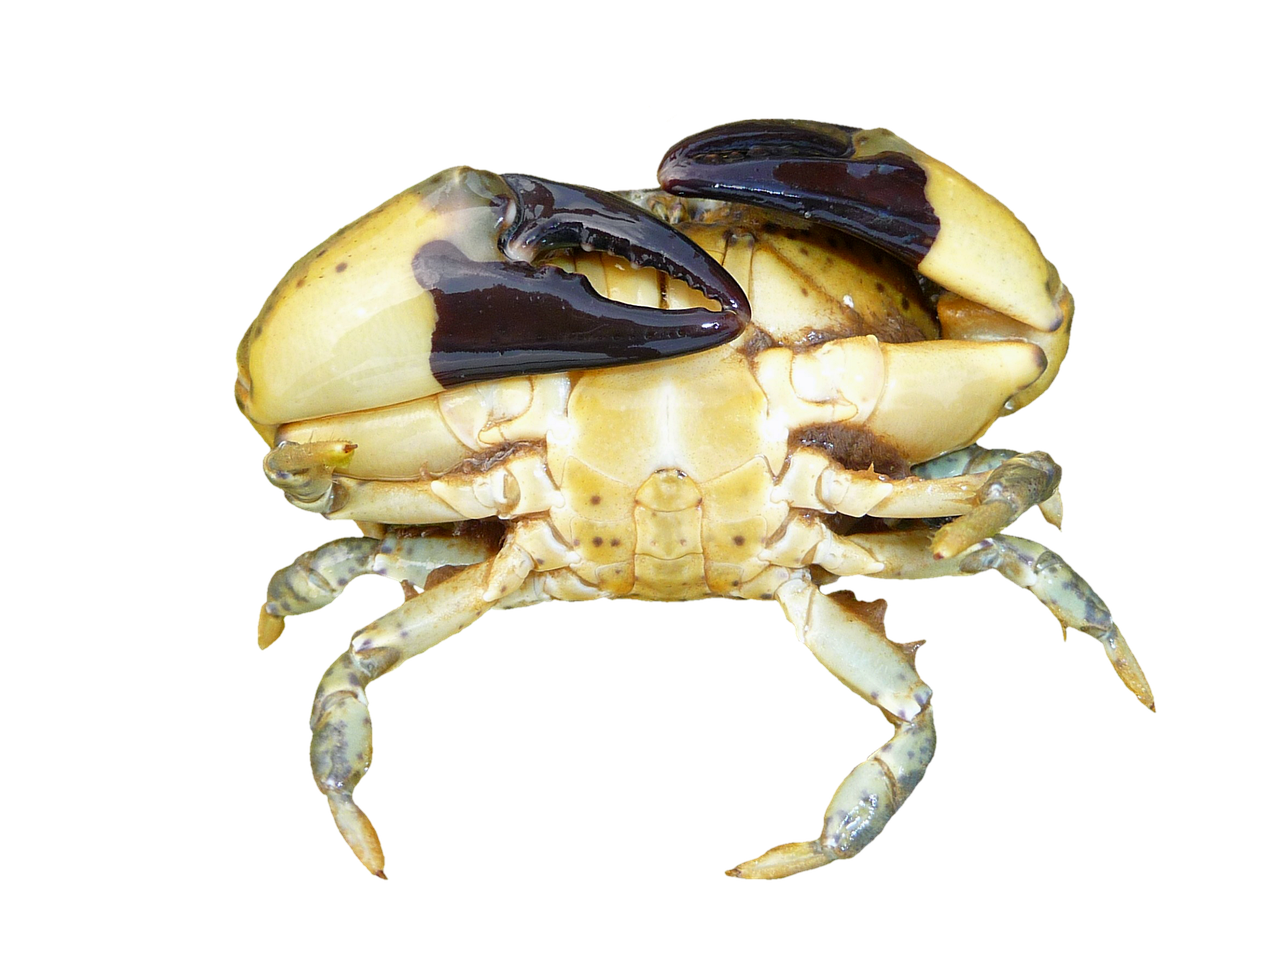 a close up of a crab on a black background, dada, rhino beetle, cut-away, grasping pseudopods, biological photo